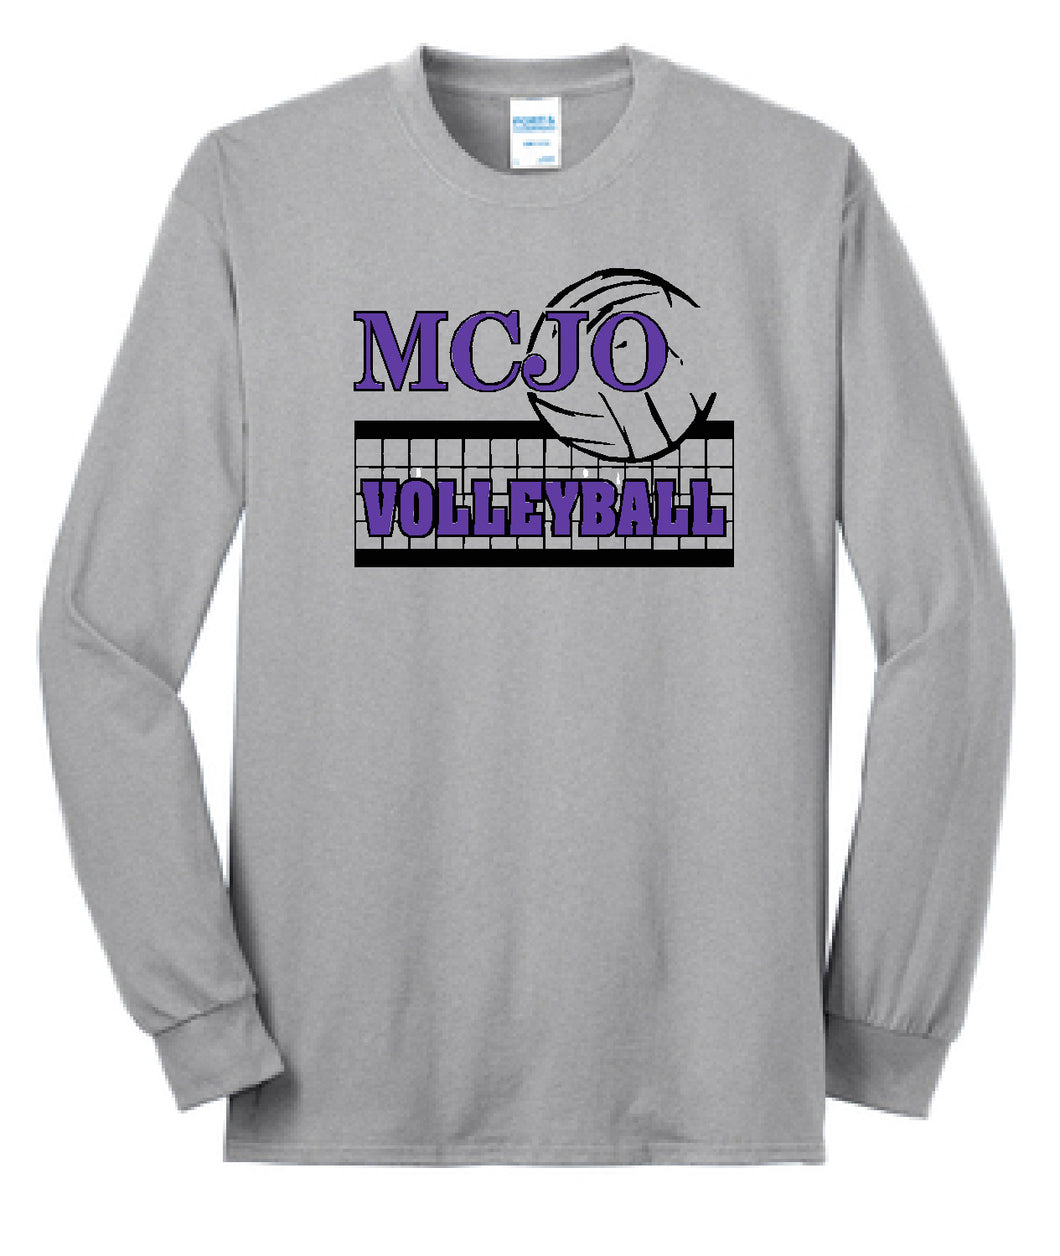 MCJO Volleyball Port & Co.  Long Sleeve Shirt